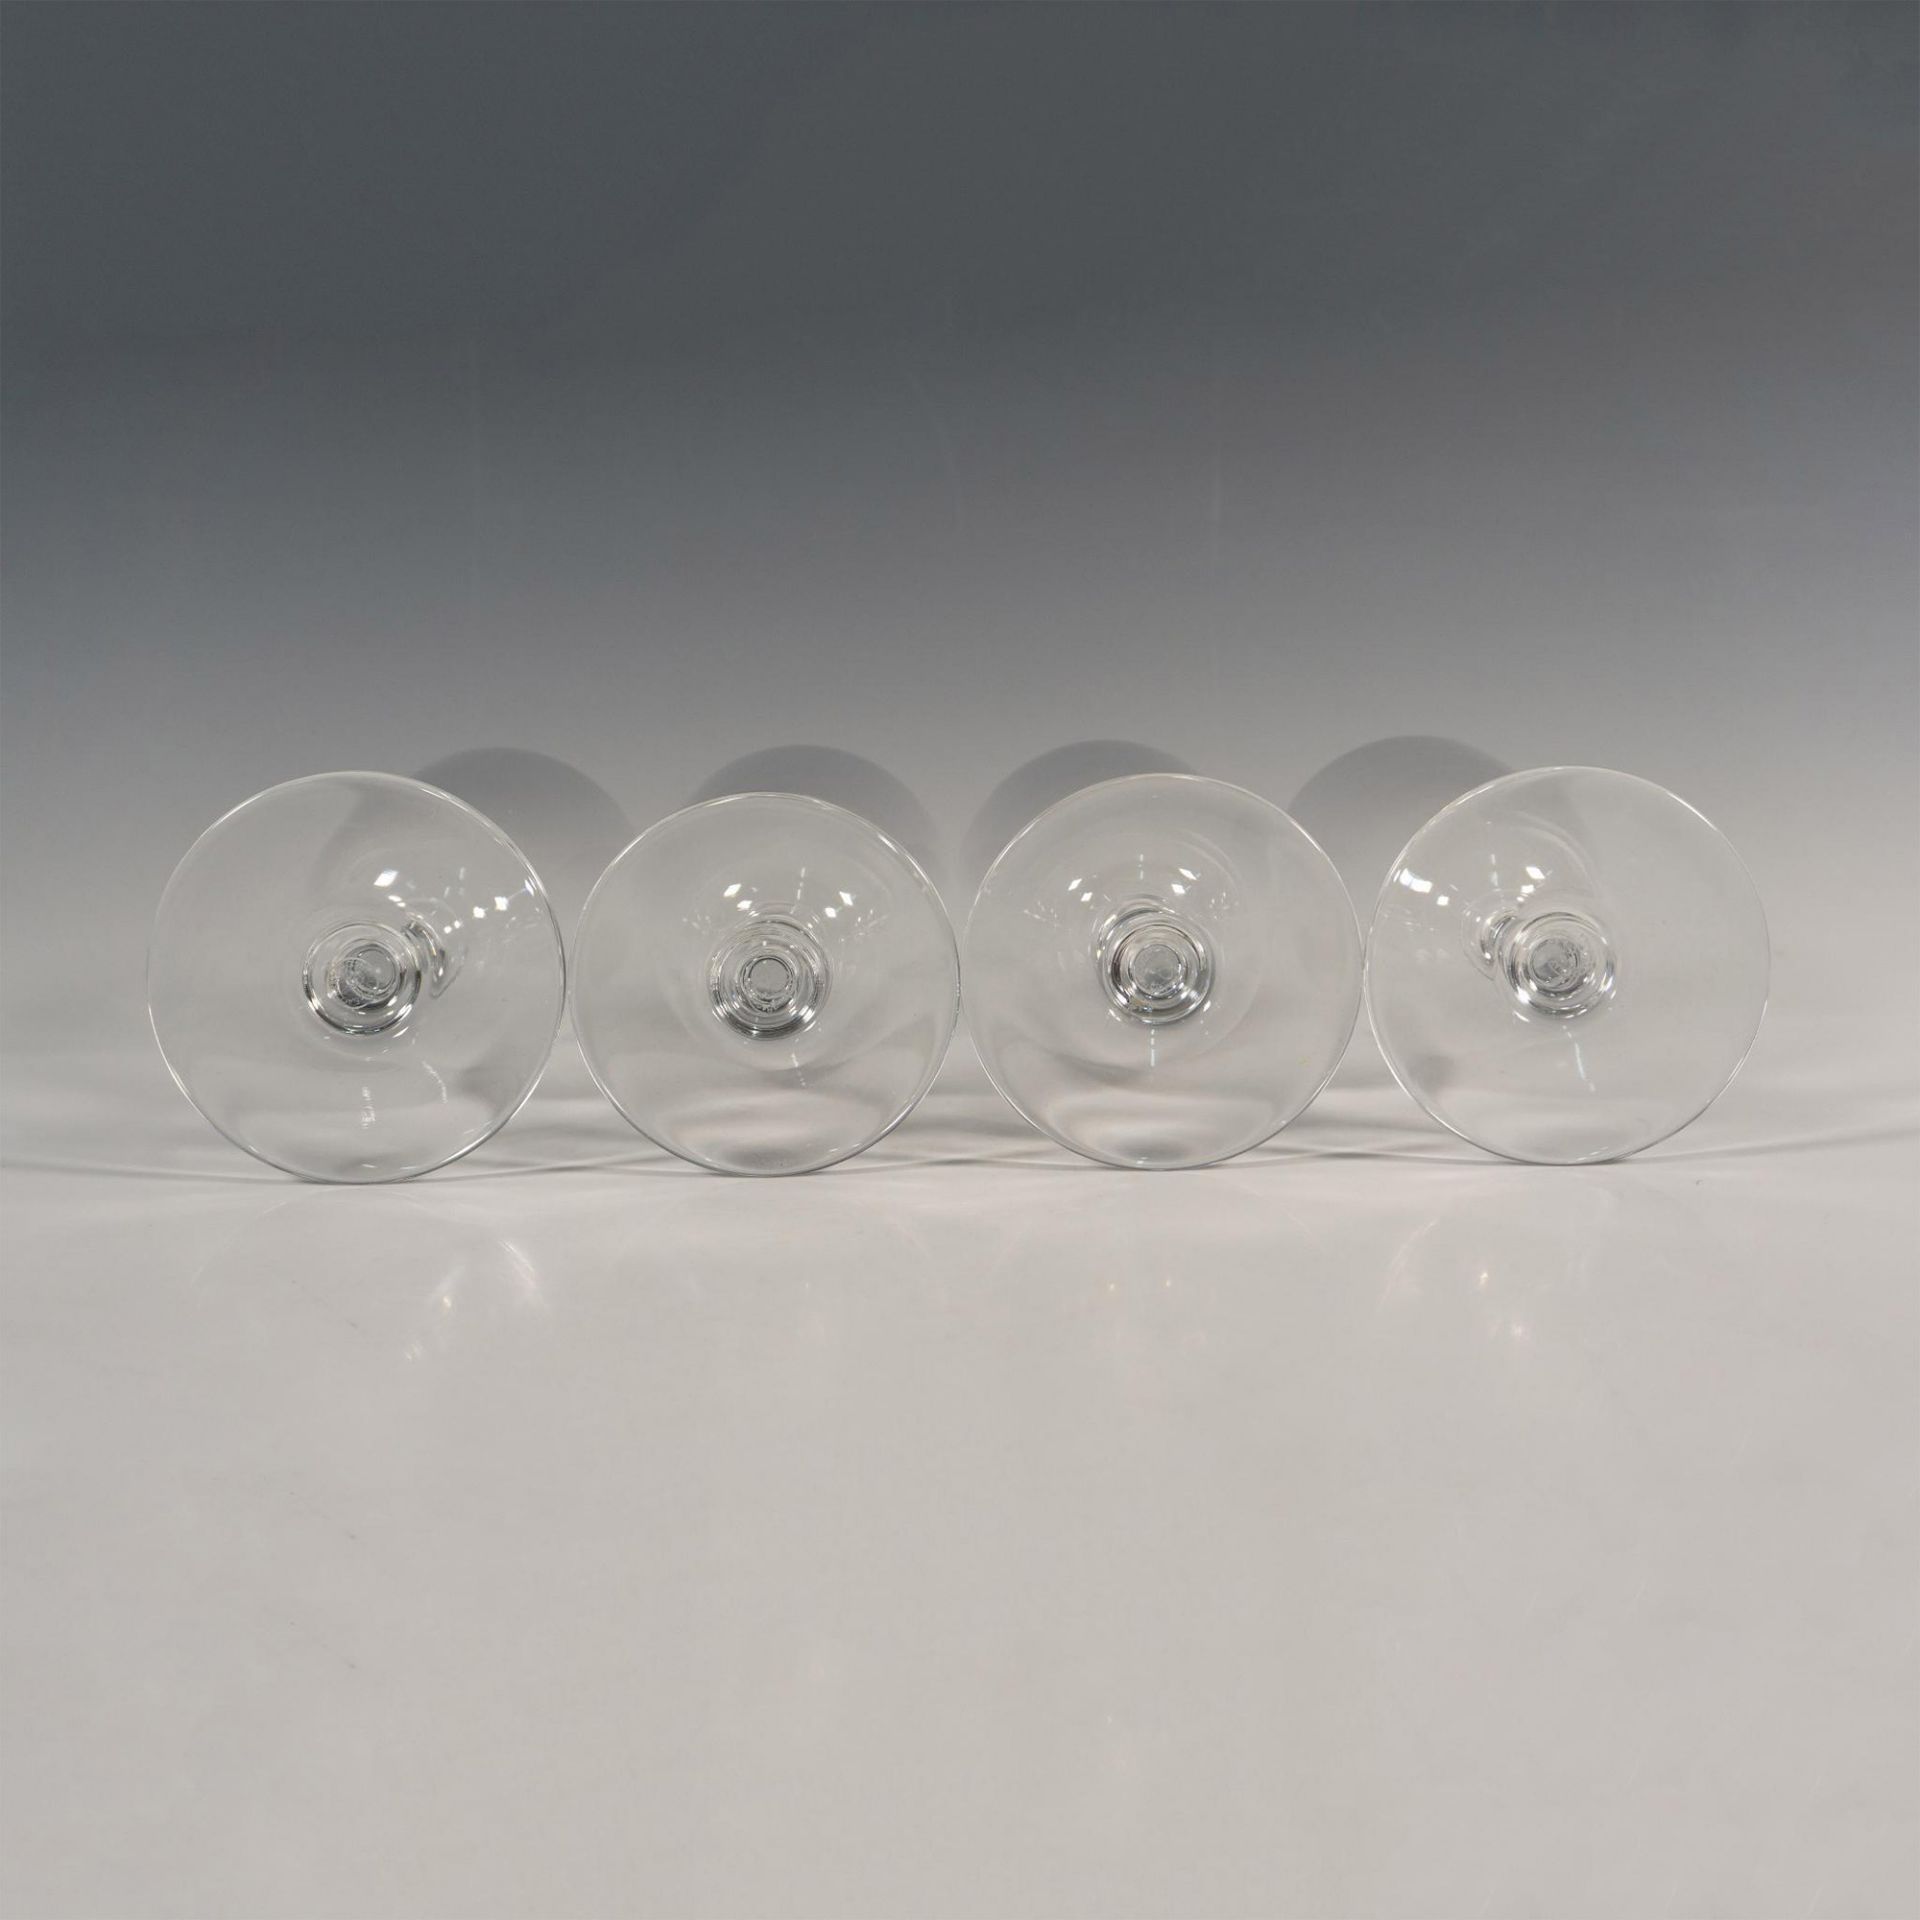 4pc Baccarat Crystal Water Goblet Glasses - Image 3 of 3